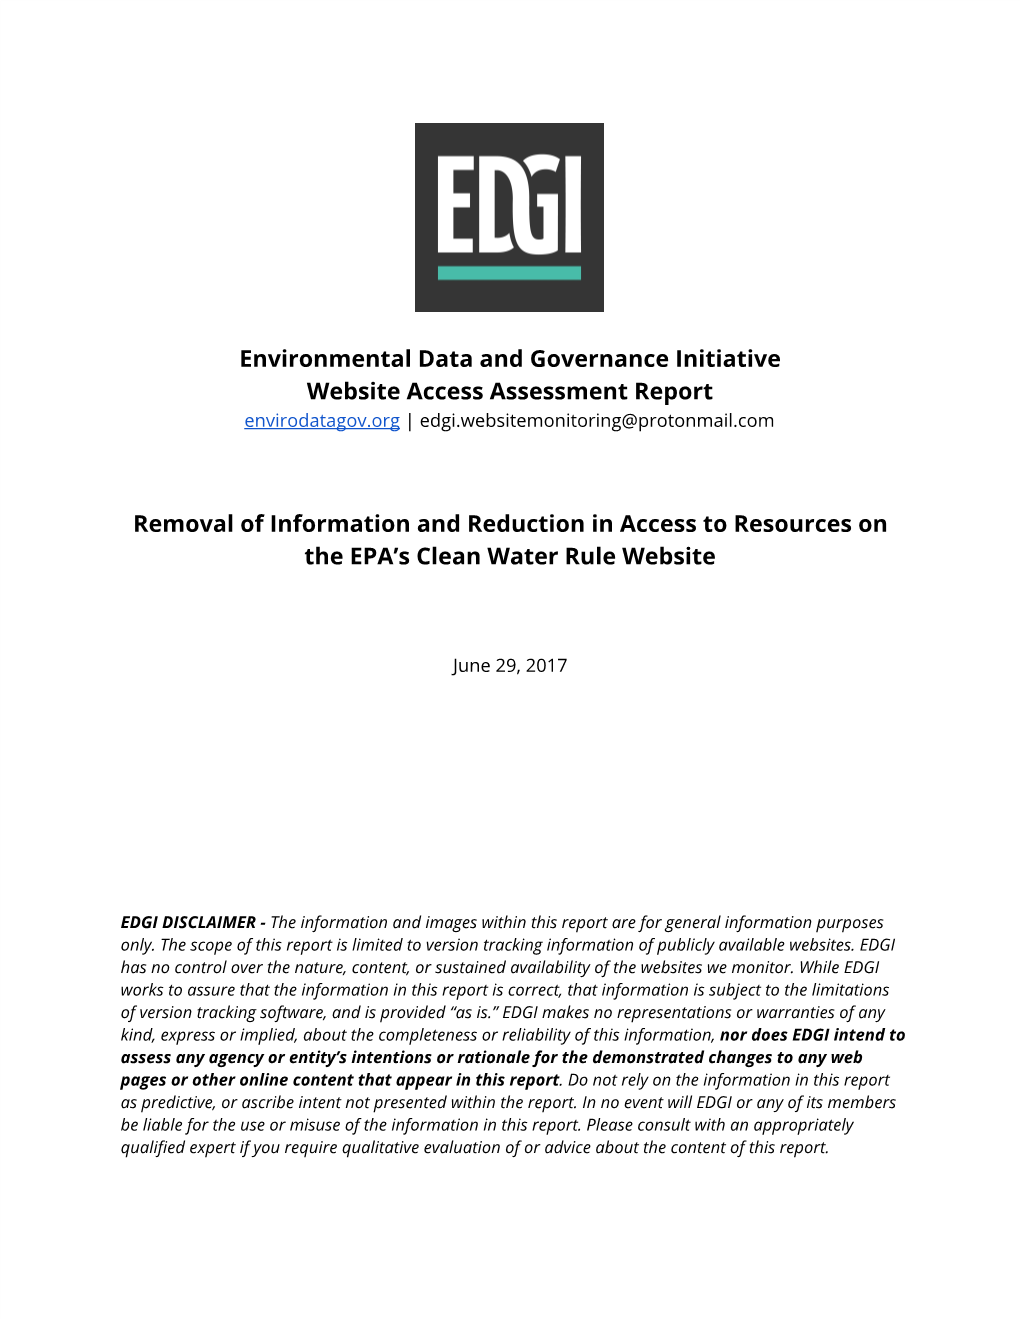 Environmental Data and Governance Initiative Website Access Assessment Report Removal of Information and Reductio